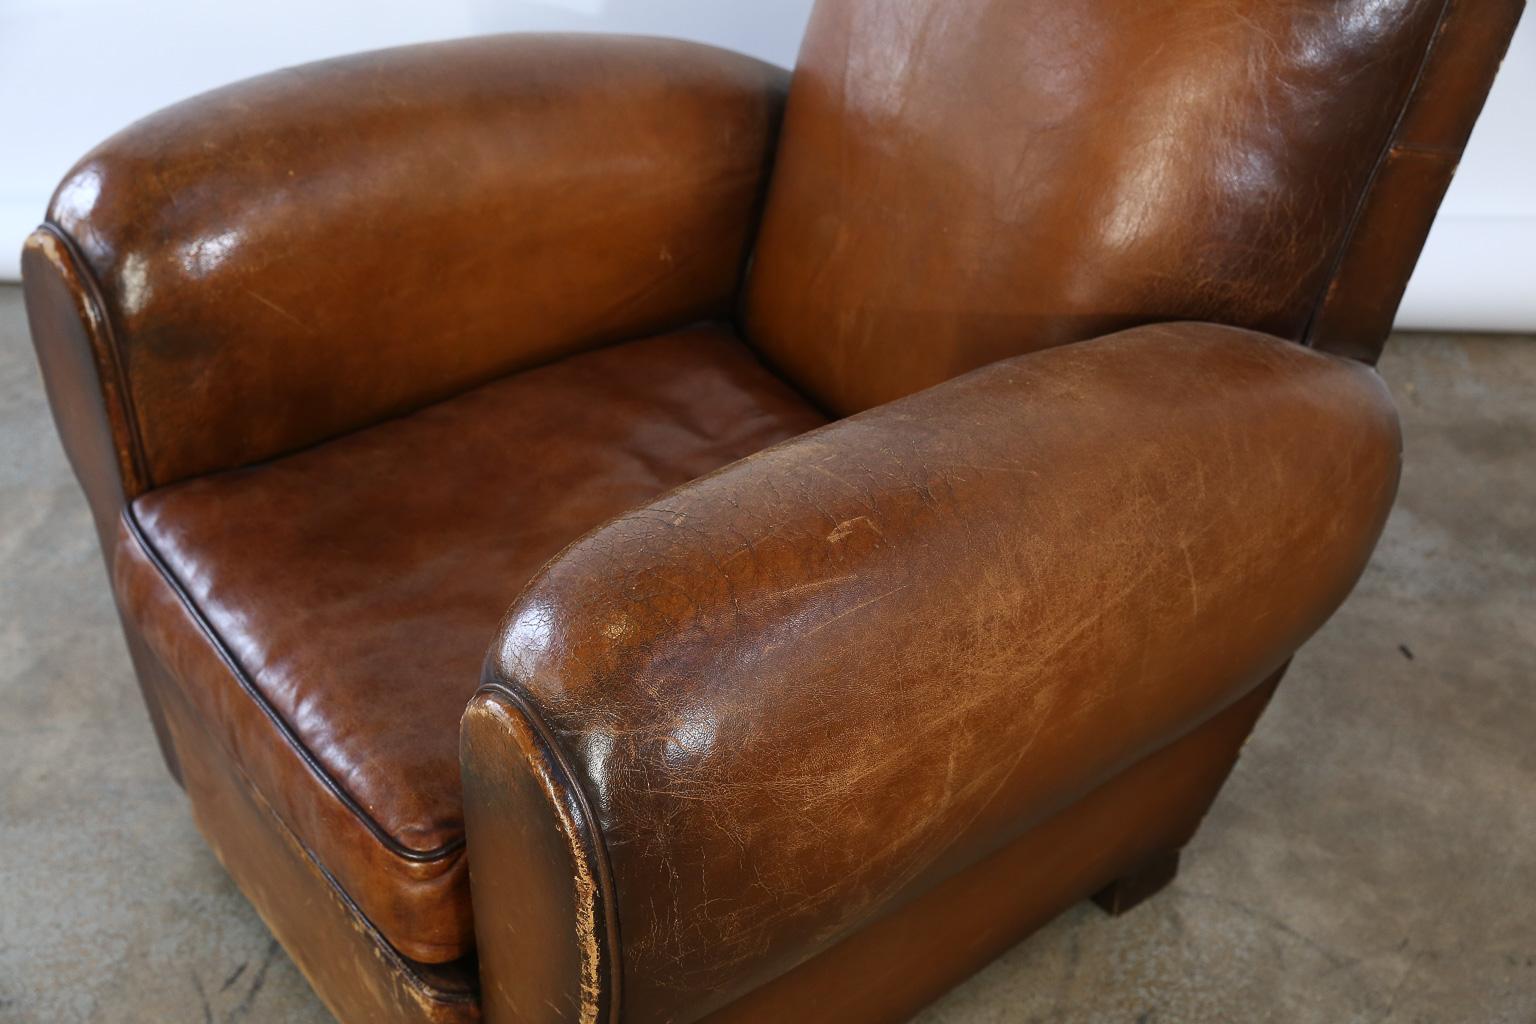 This is a beautiful Art Deco French leather club chair. The leather has a beautiful patina with wear consistent with age and use. Well used and loved for many years, the club chair boasts both style and character.